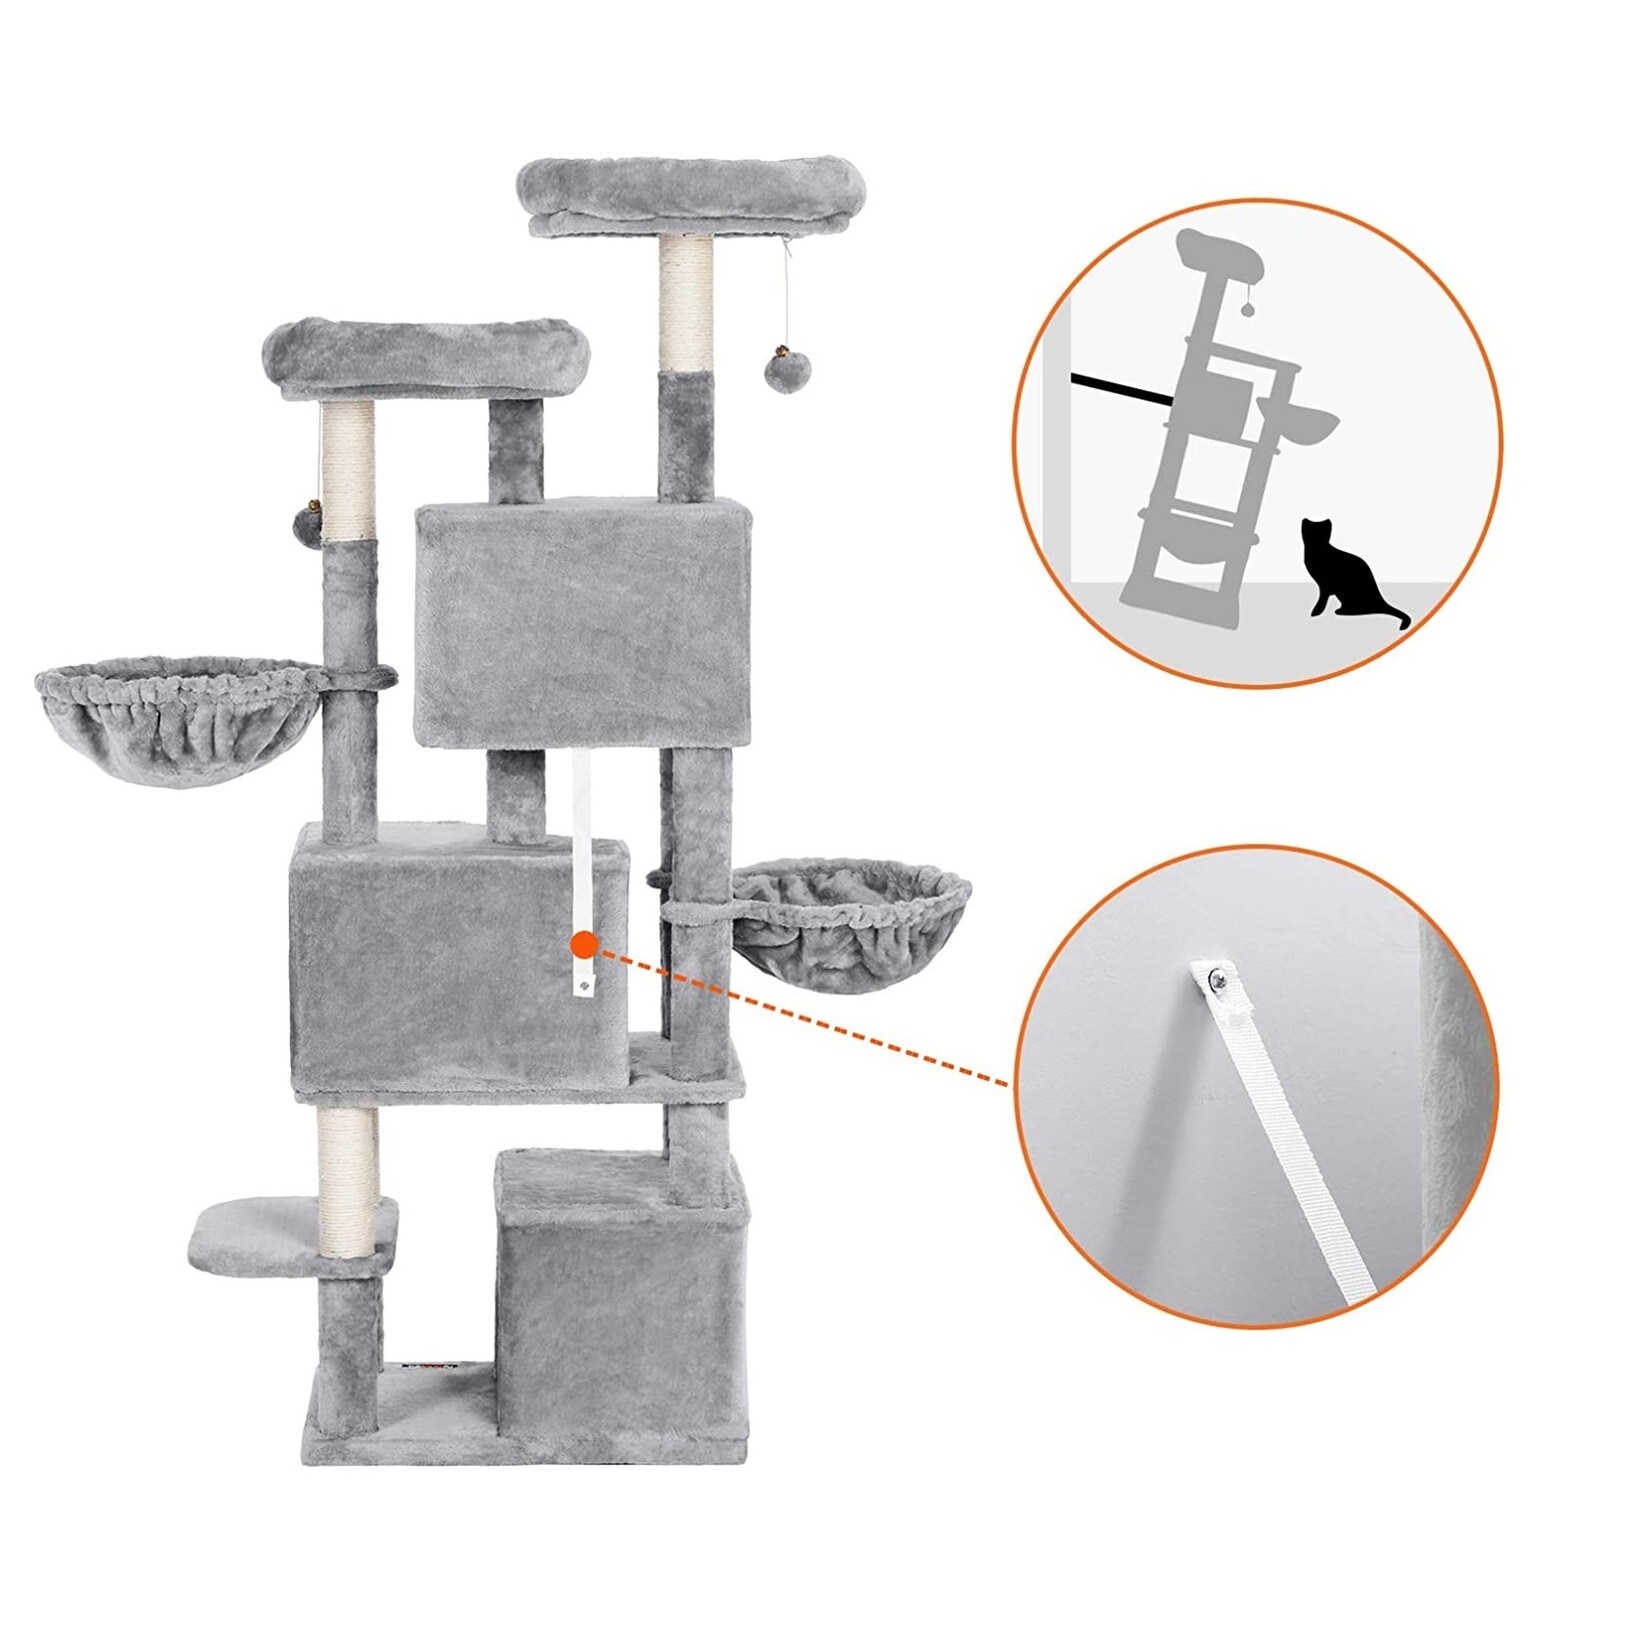 Bobbel Home Bobbel Pets - Stable Scratching Post - Incl. 3 Caves - 2 Baskets - 2 Viewing Platforms - Plush - Gray